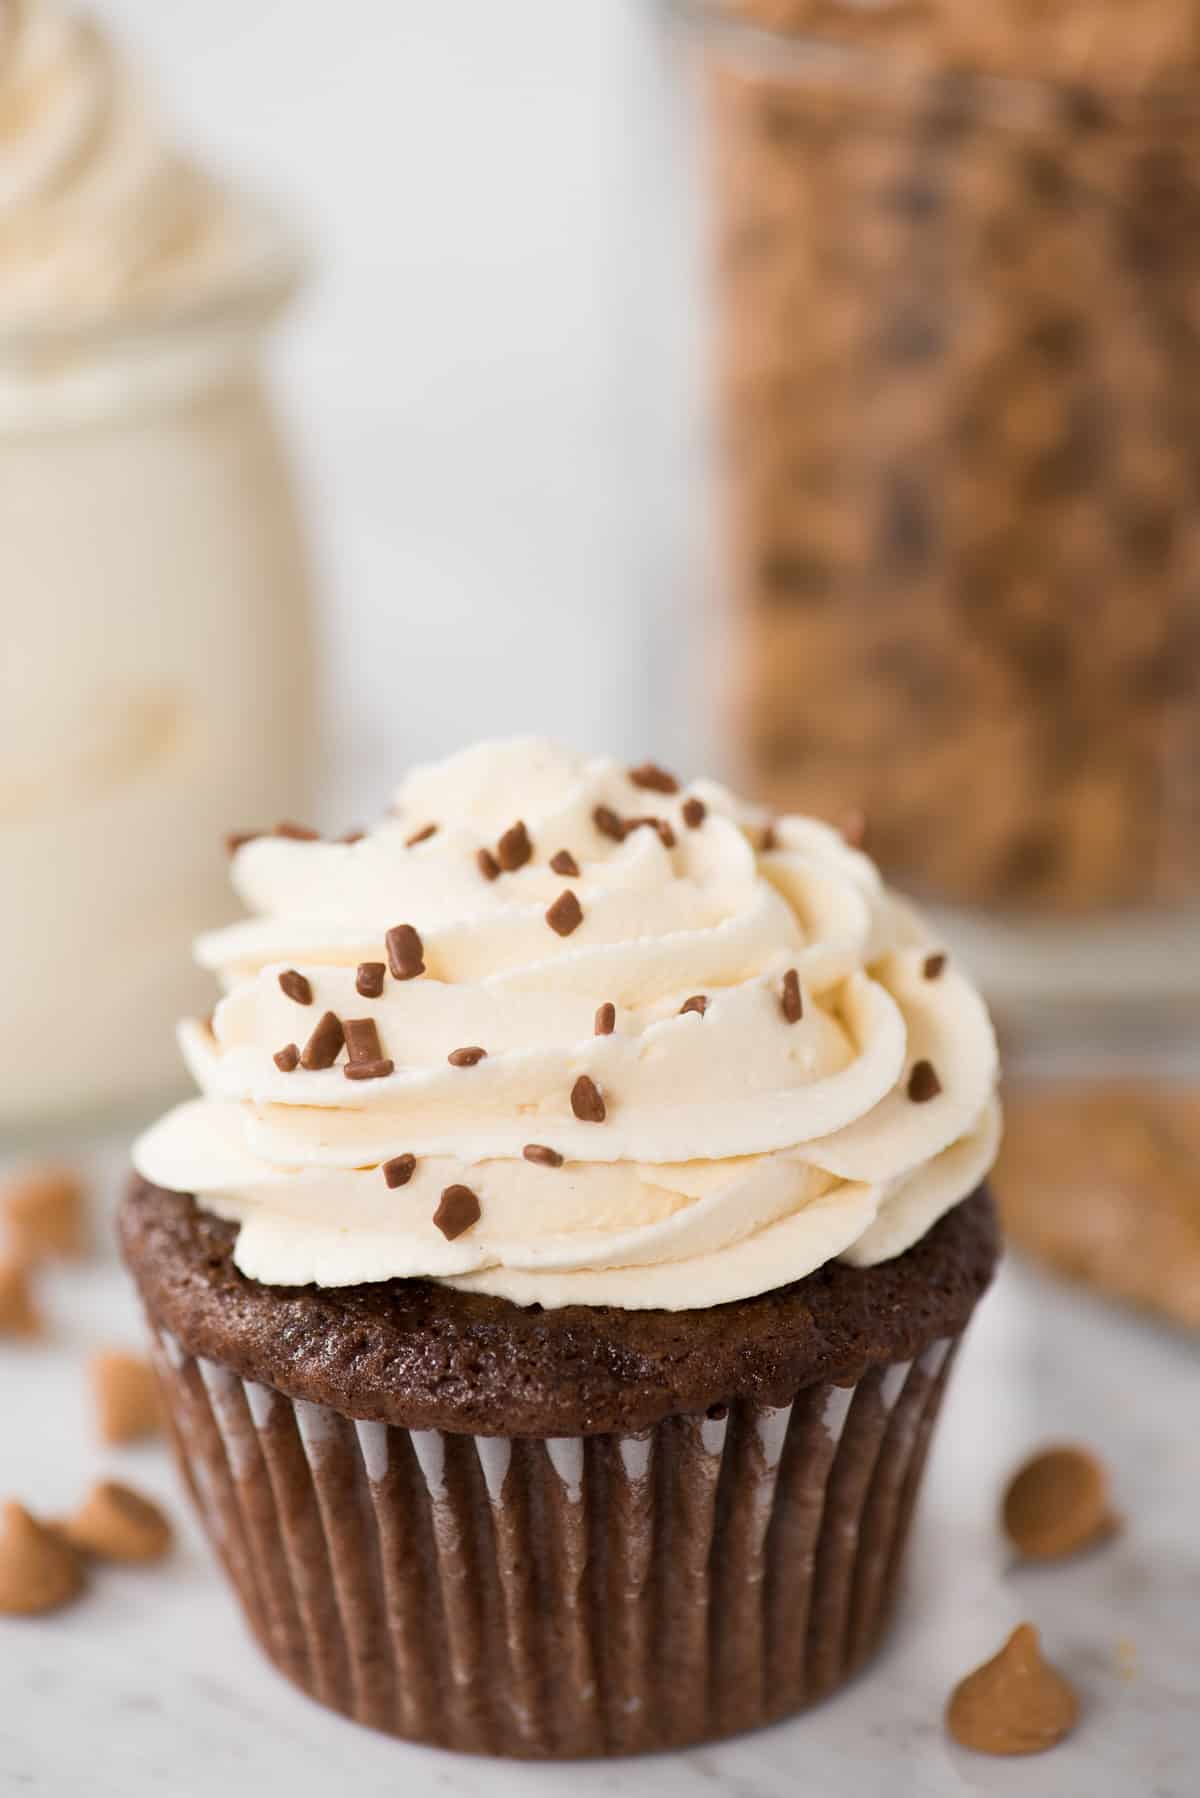 peanut butter whipped cream on top of chocolate cupcake